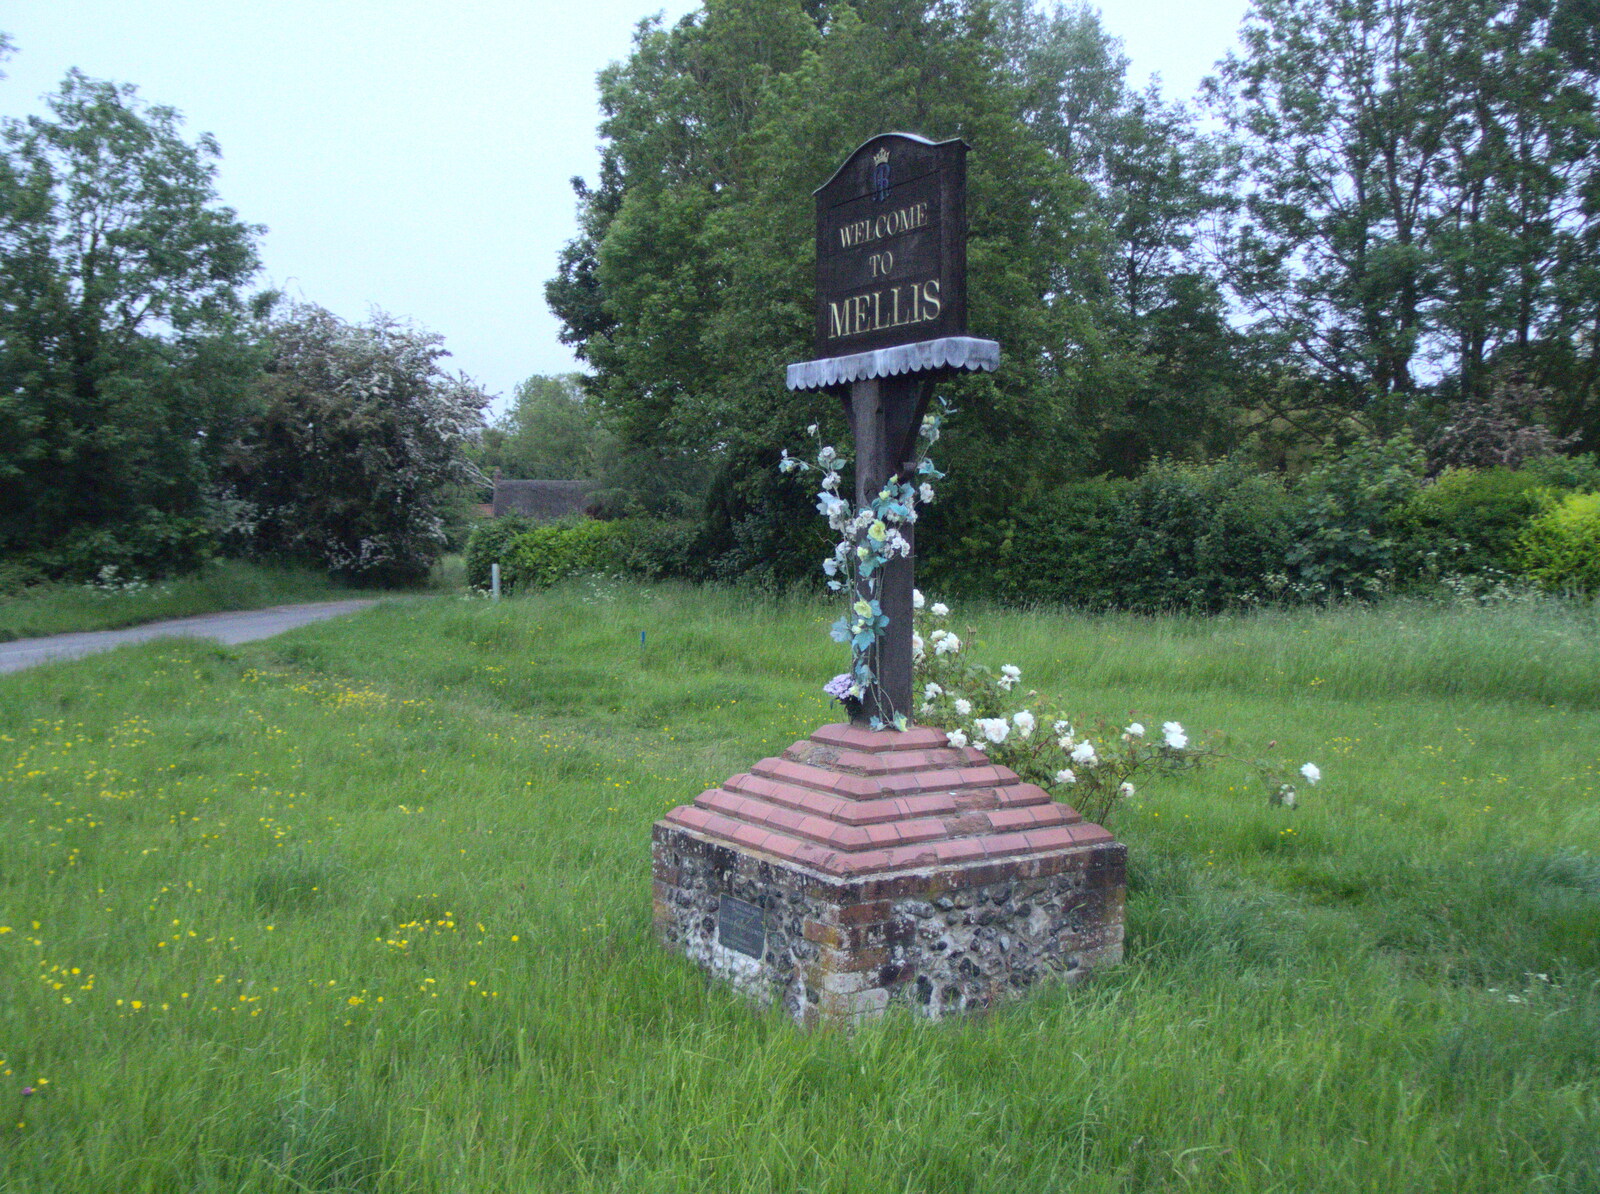 Flowers around the village sign from A Quest for the Fabled Swimming Spot, Hoxne, Suffolk - 29th May 2023